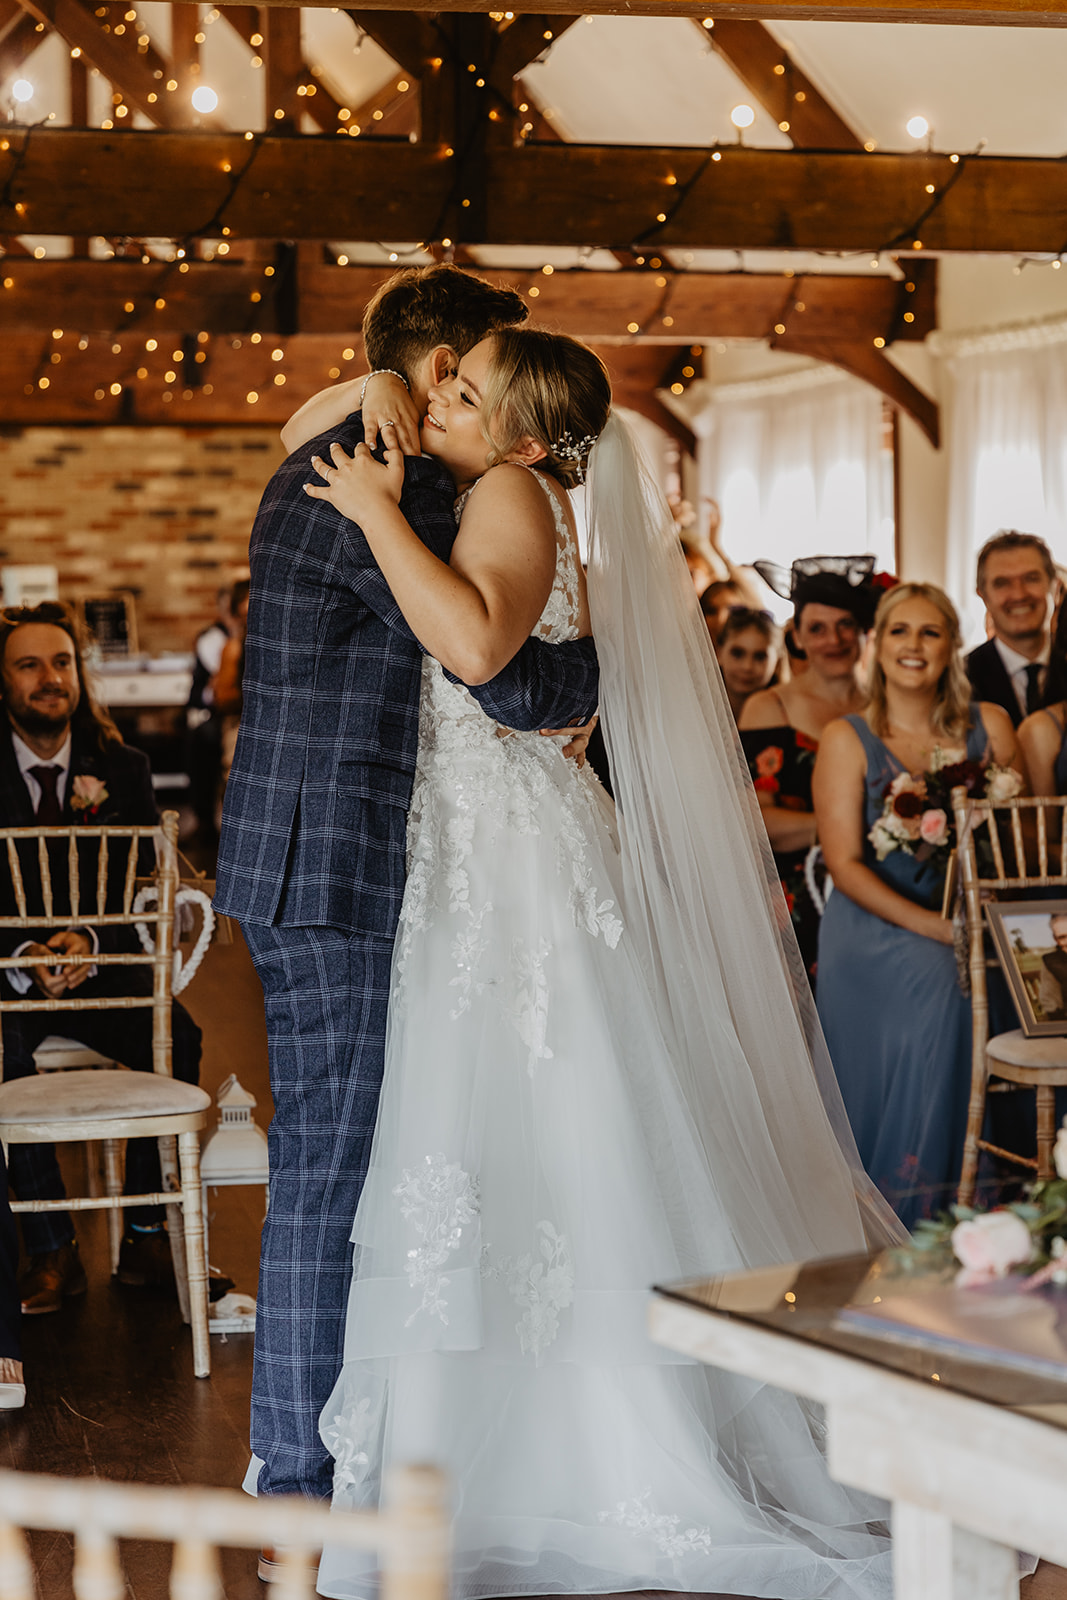 Bride and groom hug at a wedding at Long Furlong Barn, Sussex. By OliveJoy Photography.